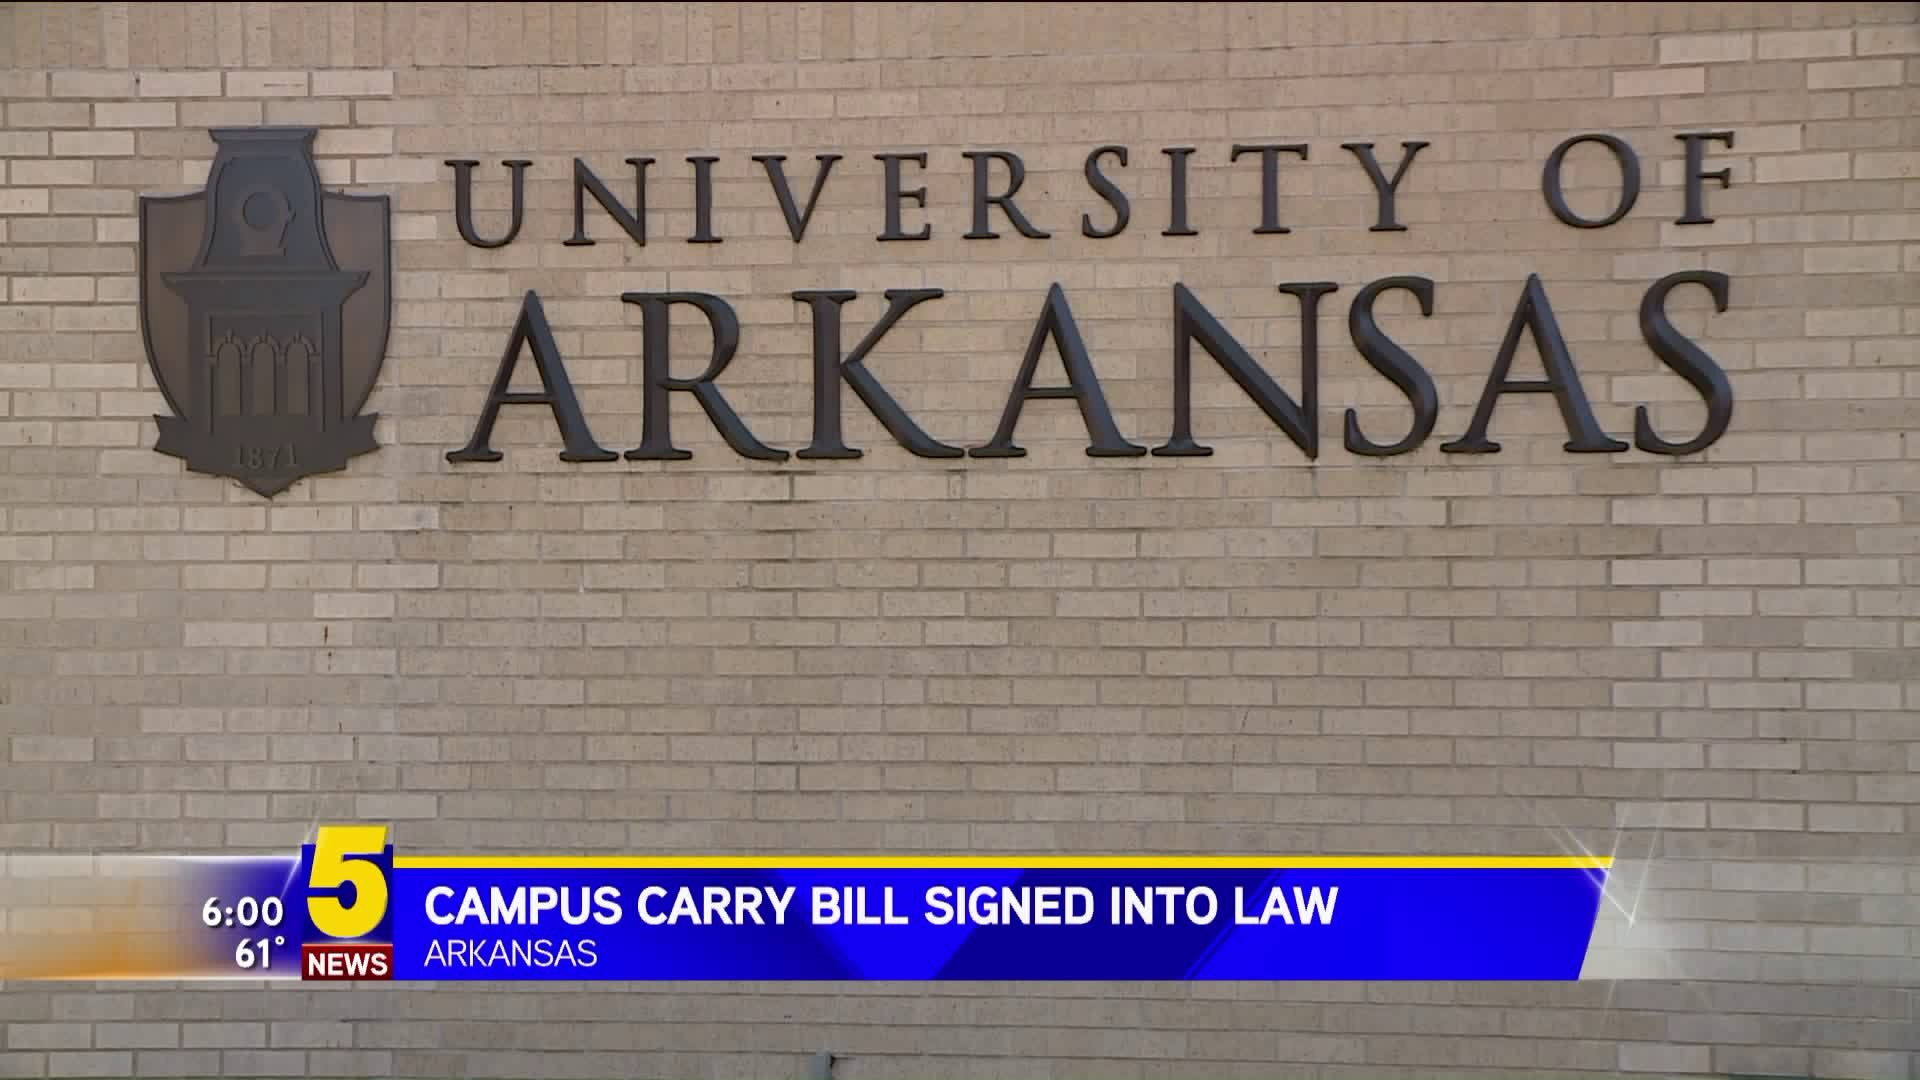 CAMPUS CARRY BILL SIGNED INTO LAW